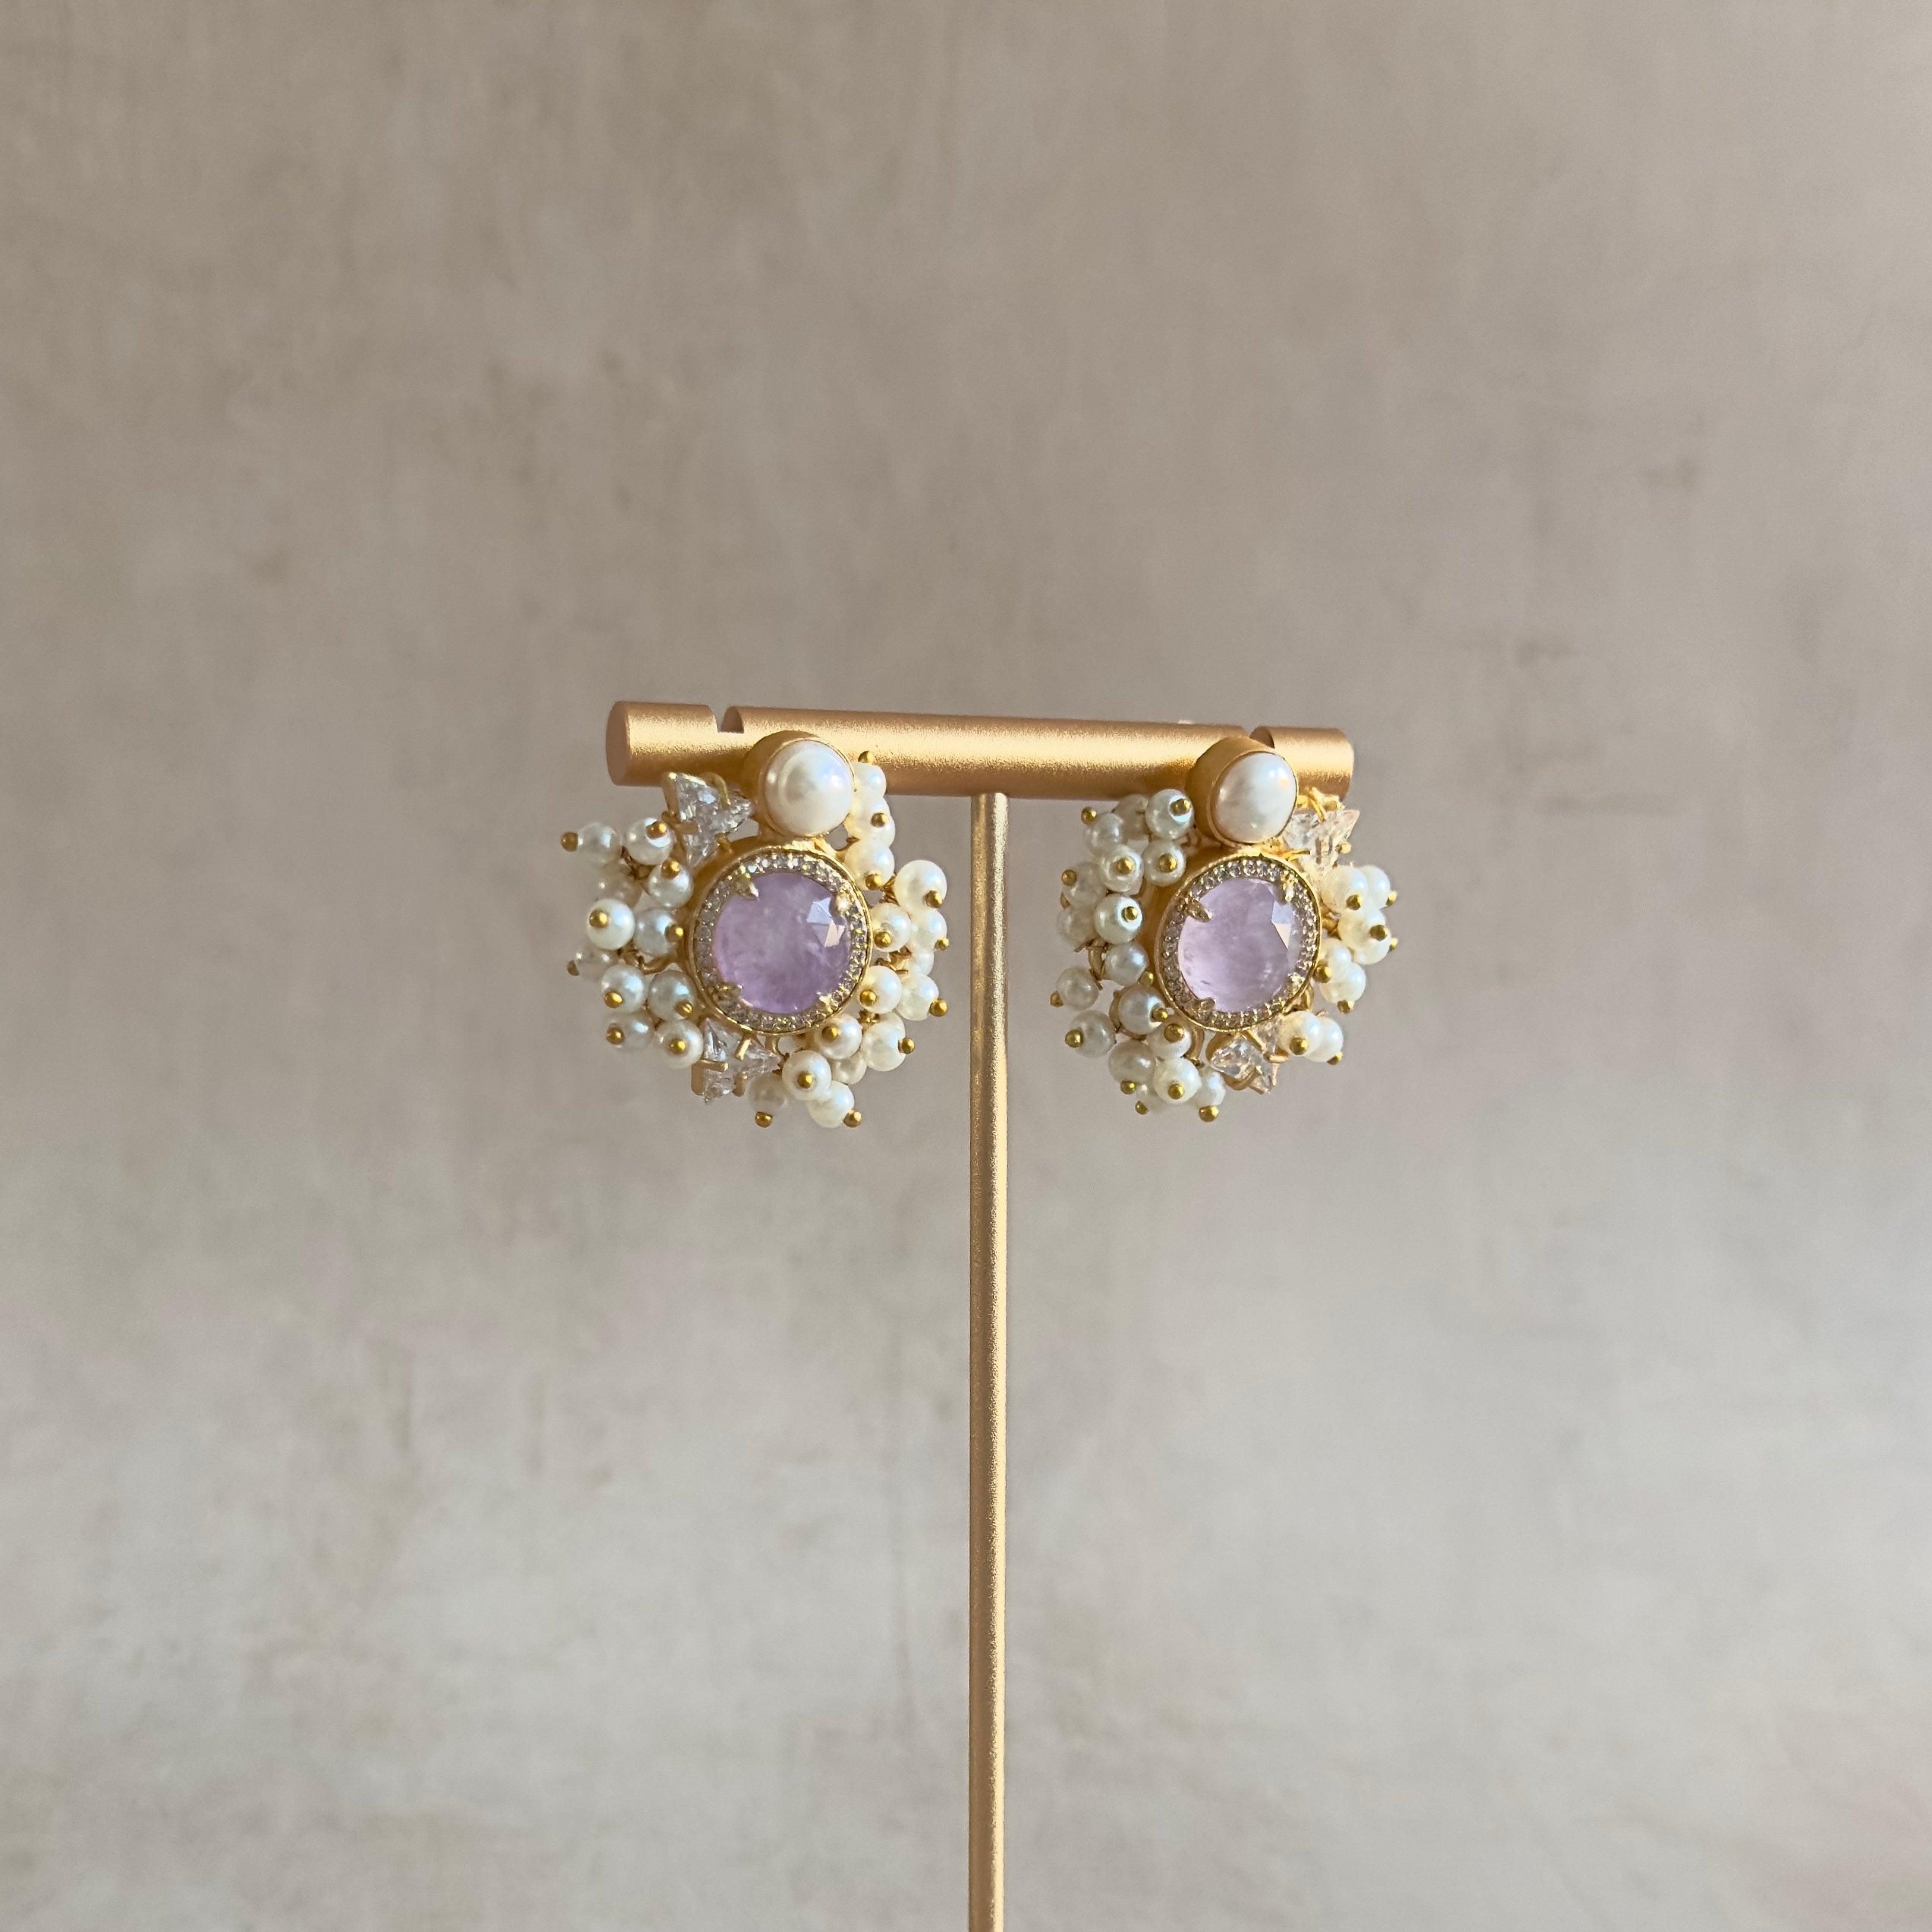 Enhance your everyday look with these Lilac Crystal Pearl Stud Earrings! The classic design paired with the pearl accent and sparkling CZ crystals will add a touch of elegance to any outfit. Make a statement and feel confident wearing these stunning studs.